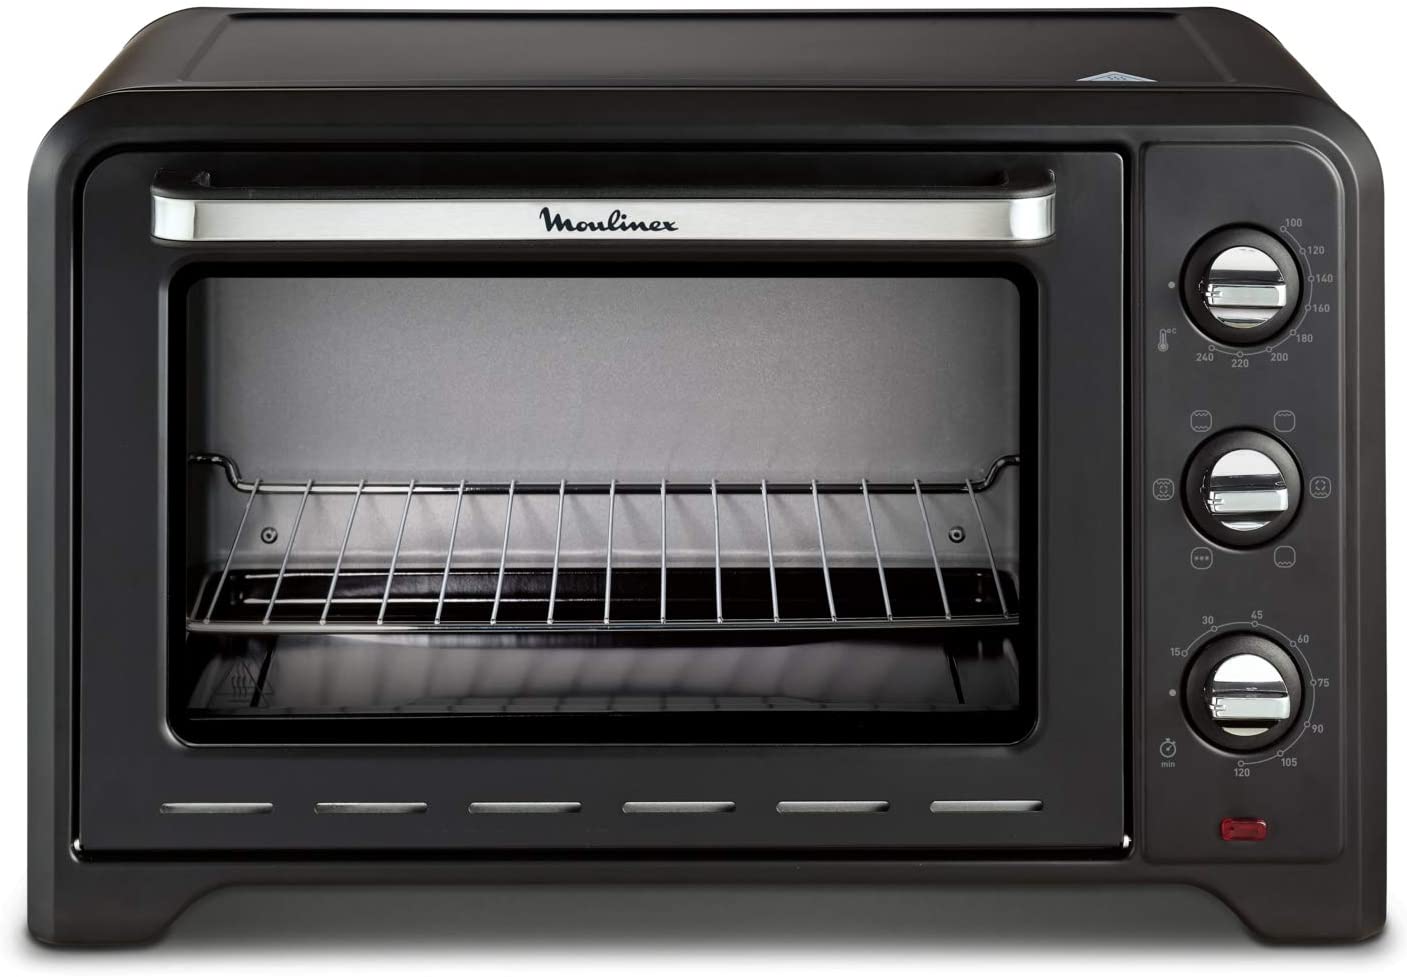 Moulinex Optimo OX487810 Electric Oven 39 L Black Recirculation 6 Cooking Modes Pizza Bread Cake Pastry 2000 W Thermostat 240° Defrost Function